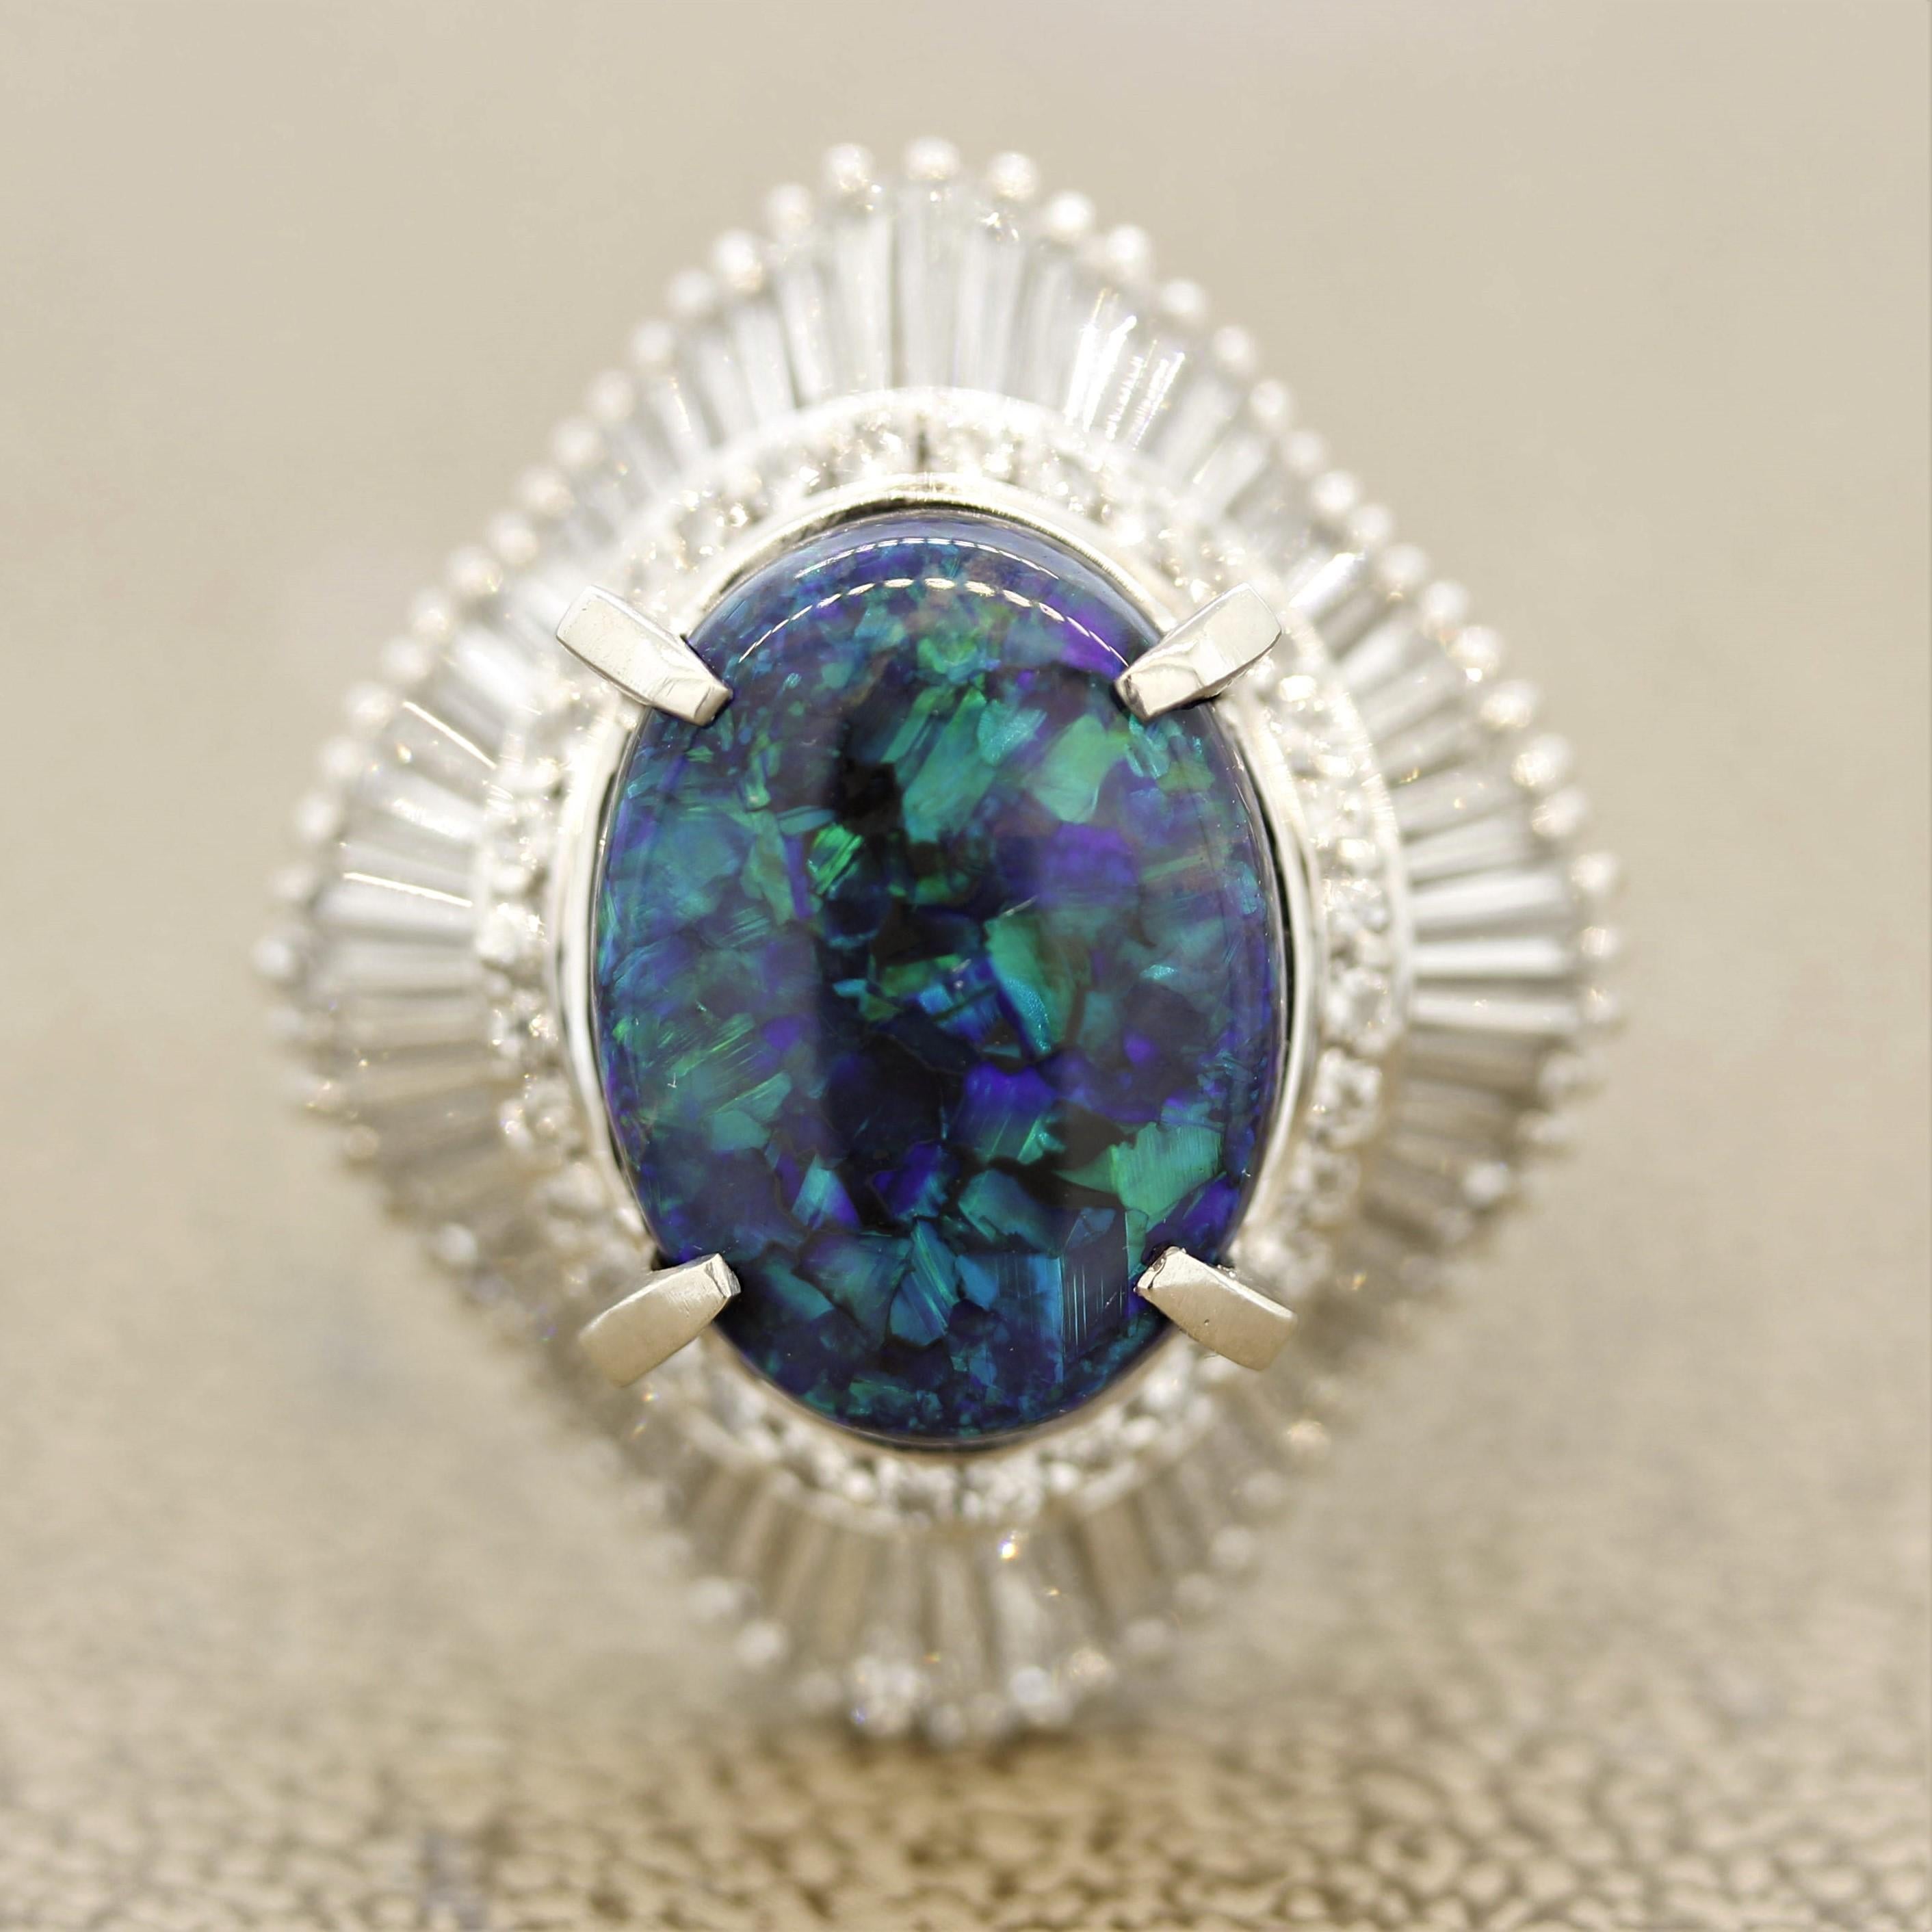 A lovely platinum cocktail ring featuring a 4.51 carat Australian black opal. It is a classic blue-green opal with excellent play of color as bright flashes roll across the surface of the stone. It is accented by 1.52 carats of round brilliant and